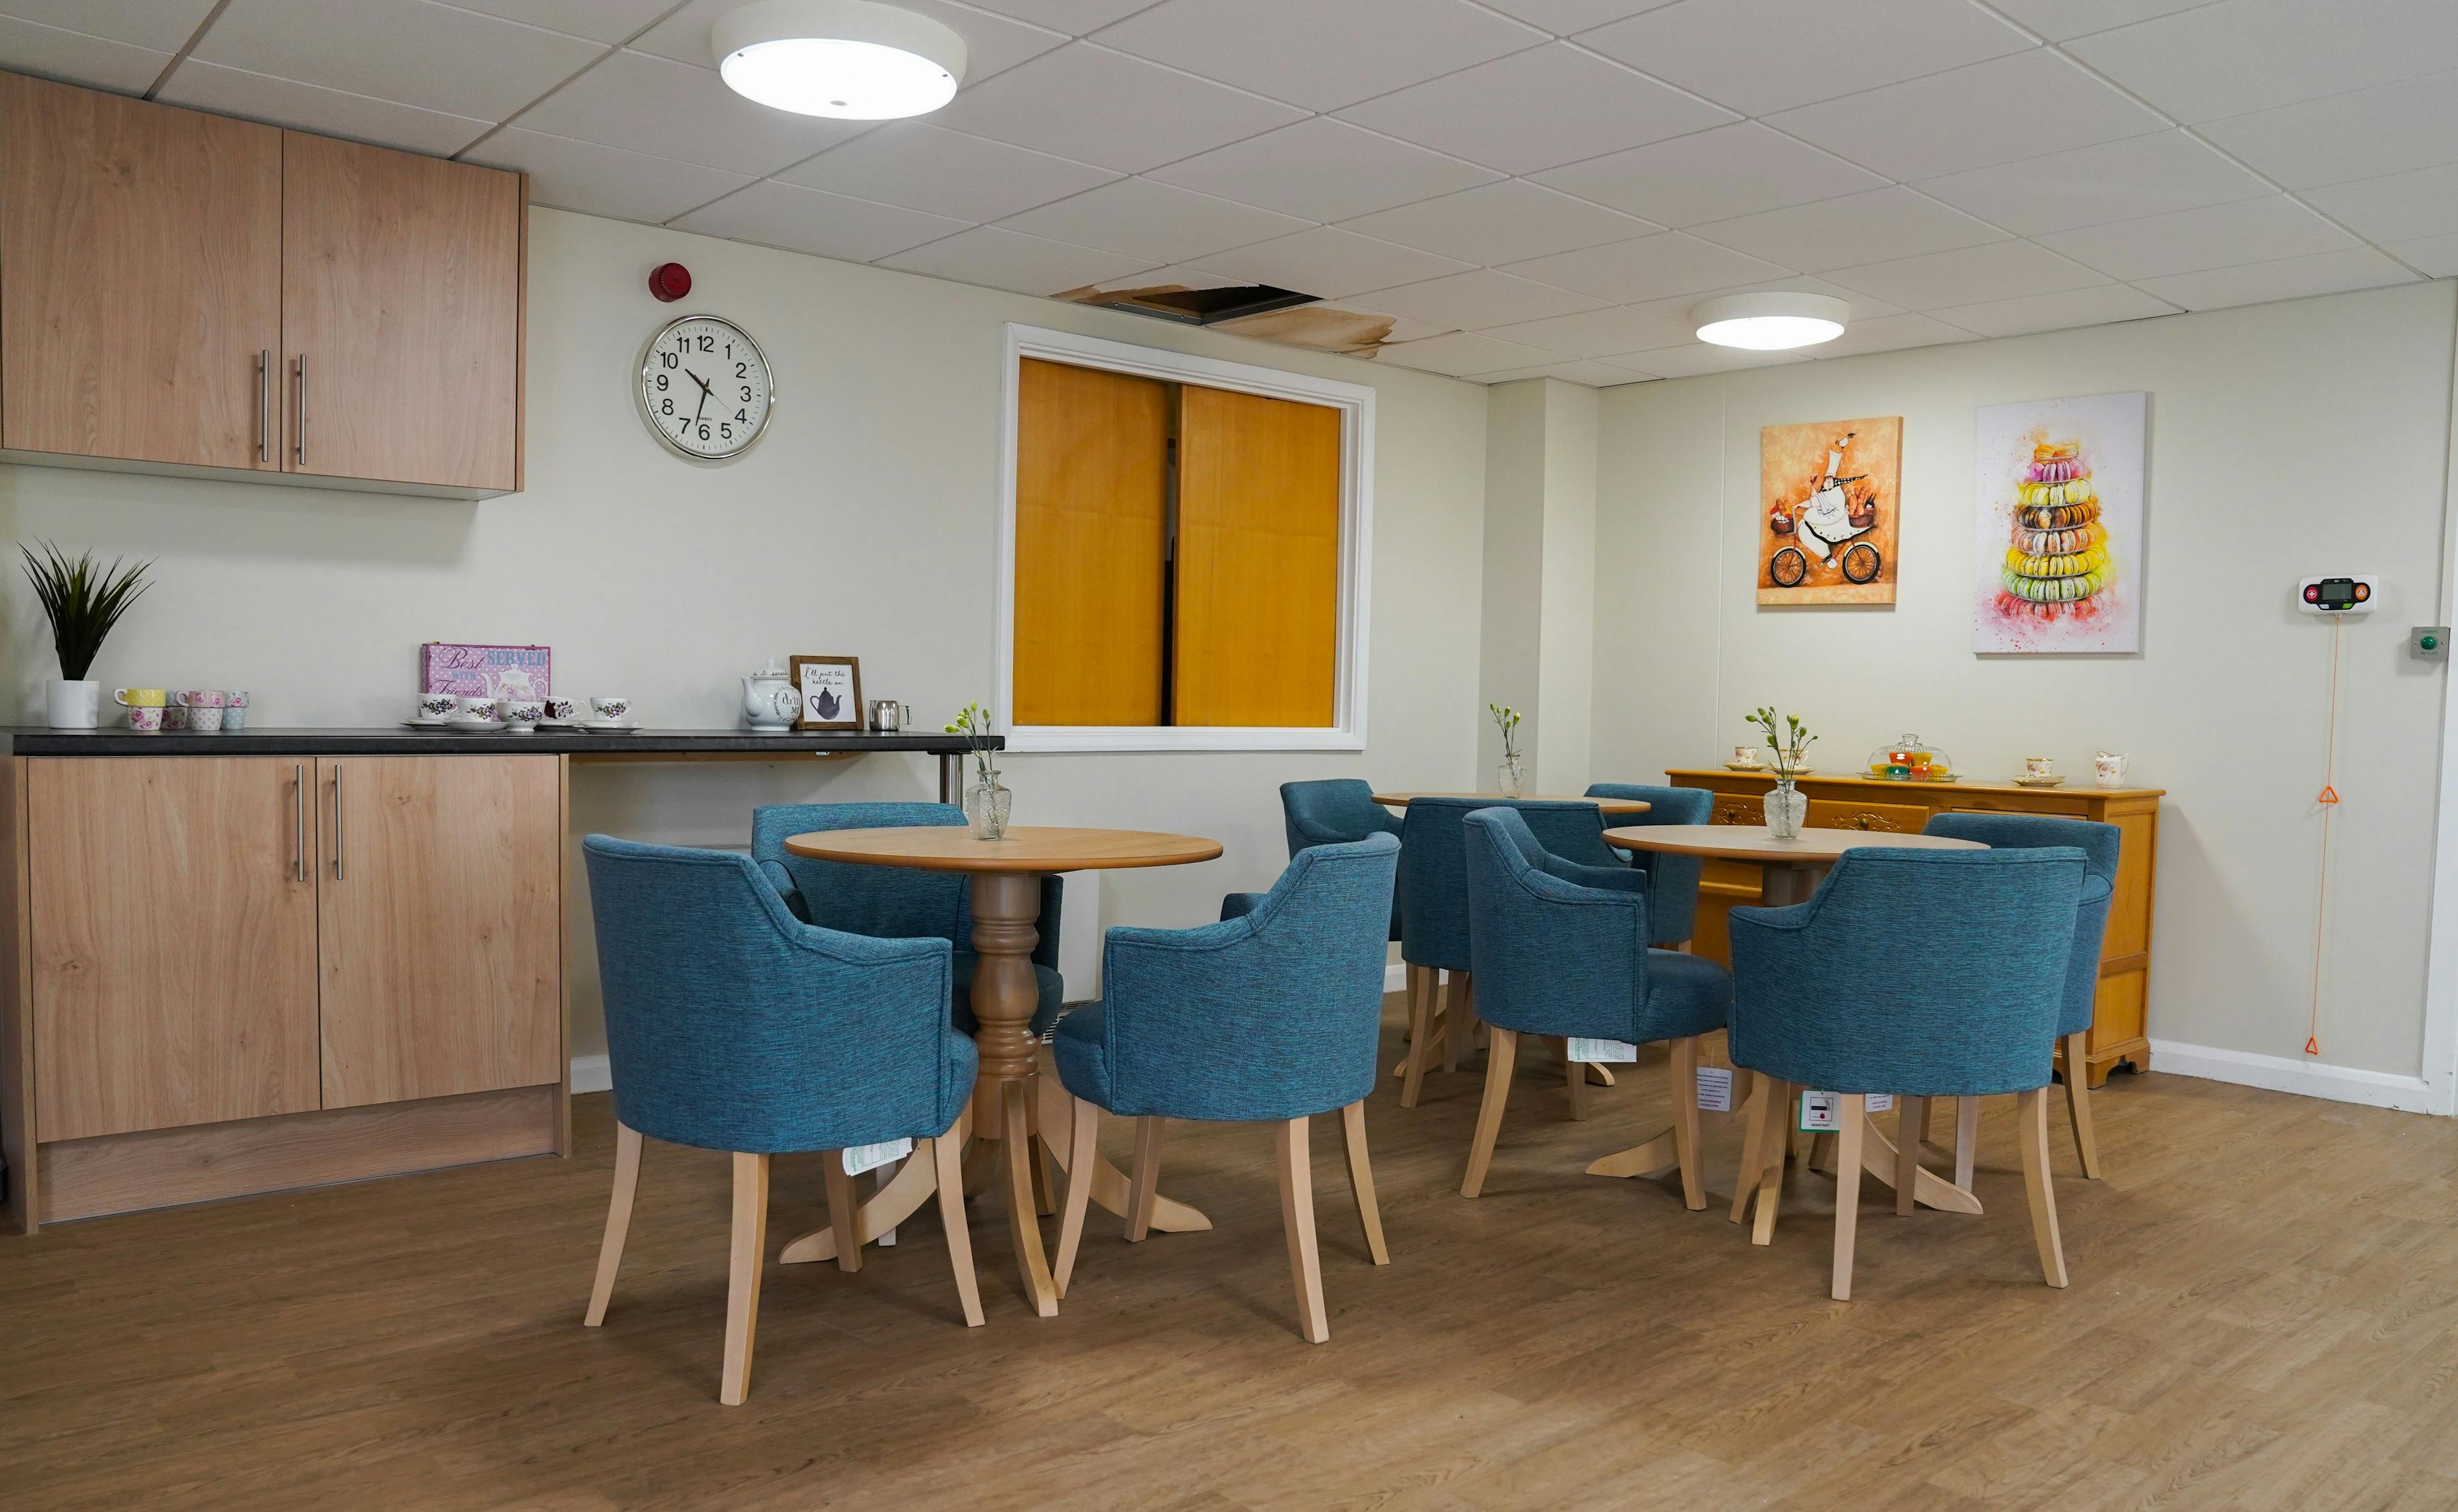 Dining Area at Calton House Care Home in Bletchley, Milton Keynes